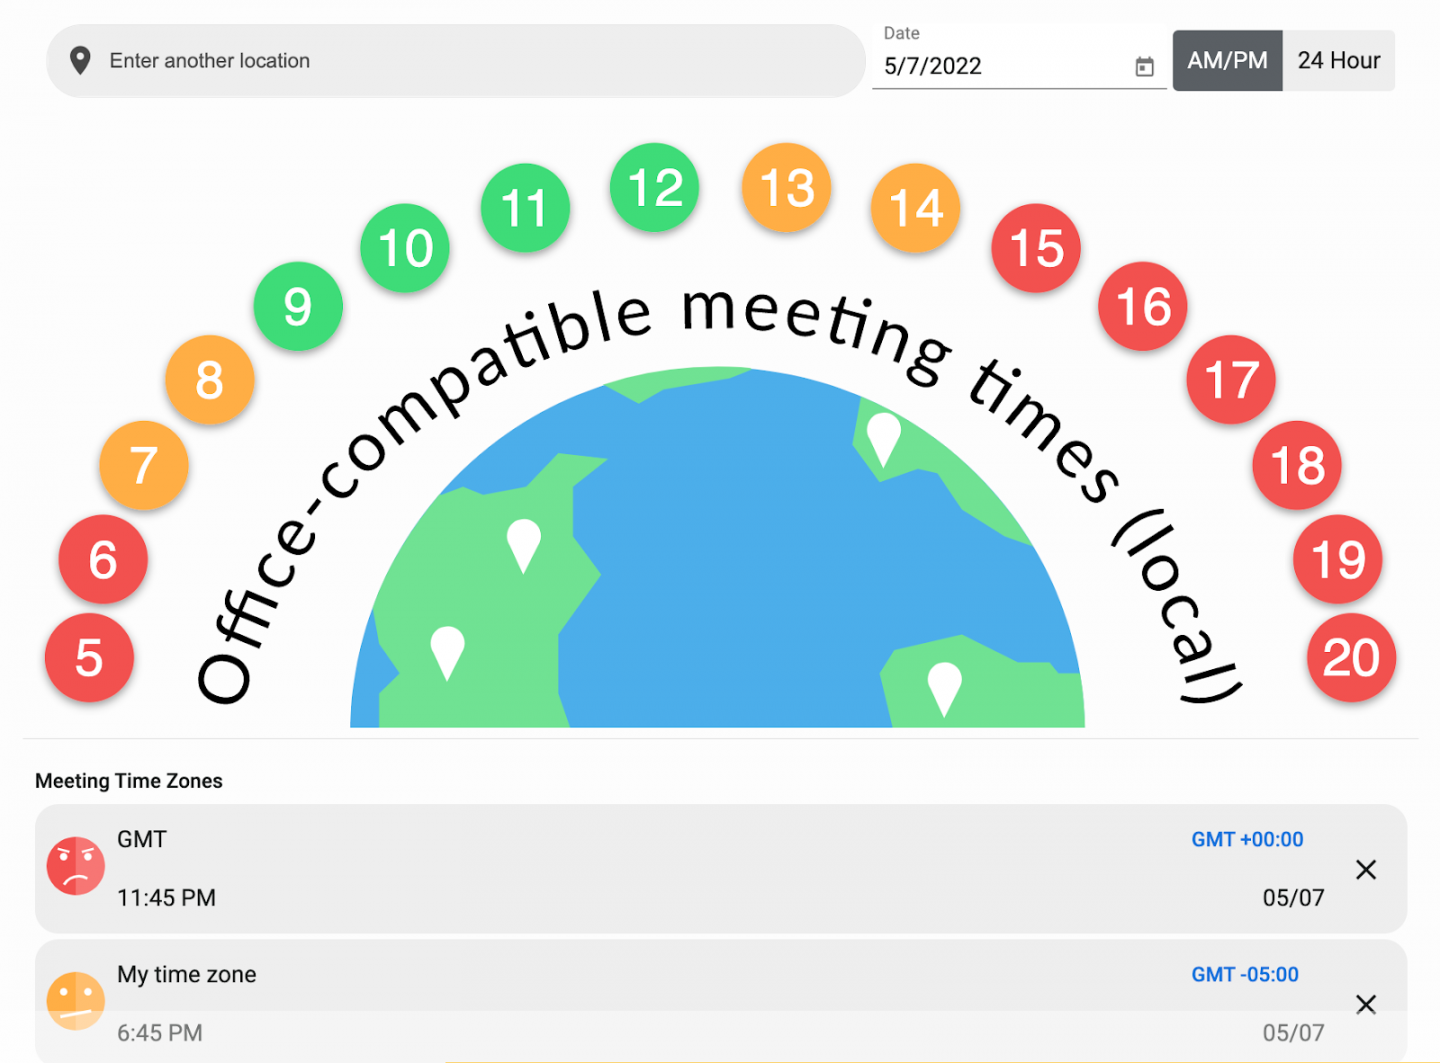 Meeting Time Zone Planners: Schedule Across Time Zones  Clockwise